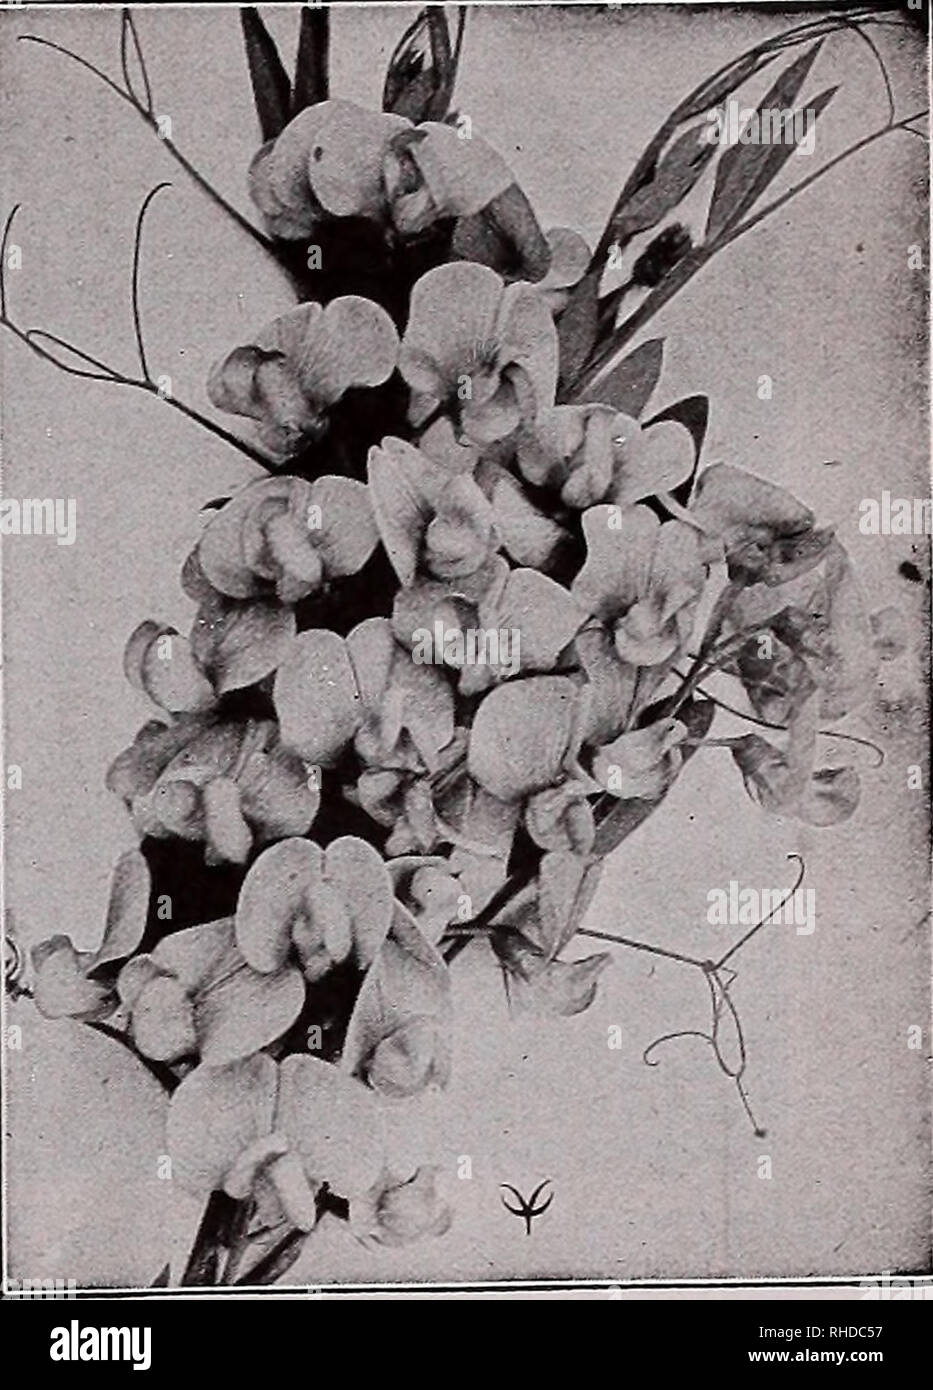 . Book for florists : spring 1935. Flowers Seeds Catalogs; Bulbs (Plants) Seedlings Catalogs; Vegetables Seeds Catalogs; Trees Seeds Catalogs; Horticulture Equipment and supplies Catalogs. HEUCHERA Sanguinea Gilia Coronopifolia (Ipomopsis Elegans Mixed). 3 Yi ft. (Standing Cypress.) Very leafy, the divisions being needle-like about one inch long. The flowers are 1J^ inches long, trumpet-shape, borne along the side of the summit of the stem. The colors include vermil- ion, salmon, apricot, rich pinks and pure yellow. A biennial $0.15 Coronopifolia Red M oz., $1.00 .50 Globularia Trichosantha (G Stock Photo